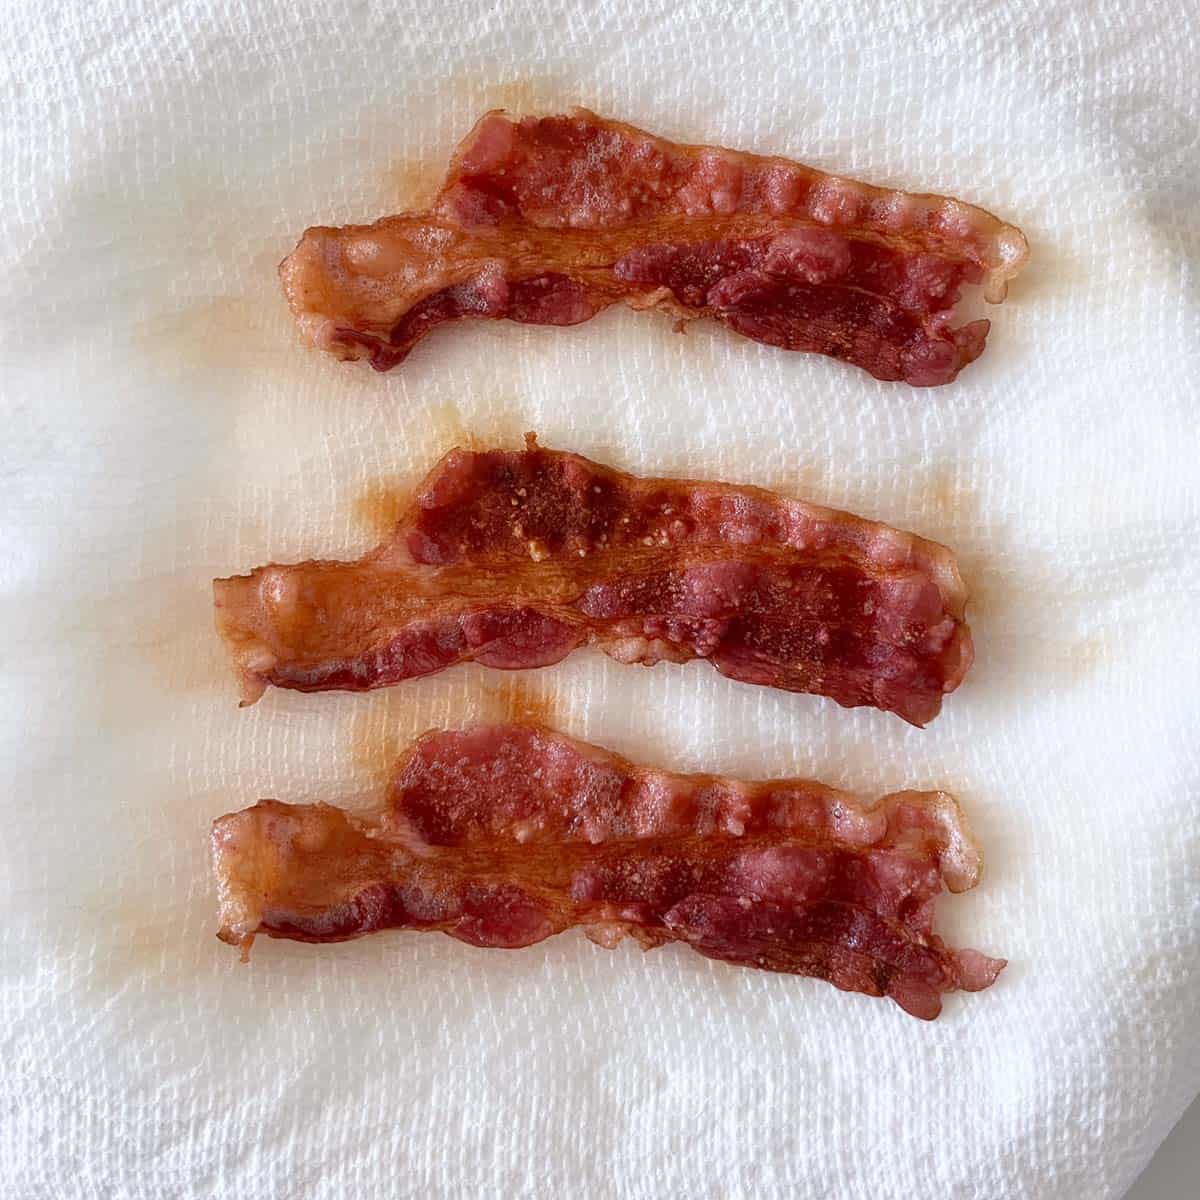 Three slices of bacon that were microwaved for three minutes are came out crispy.